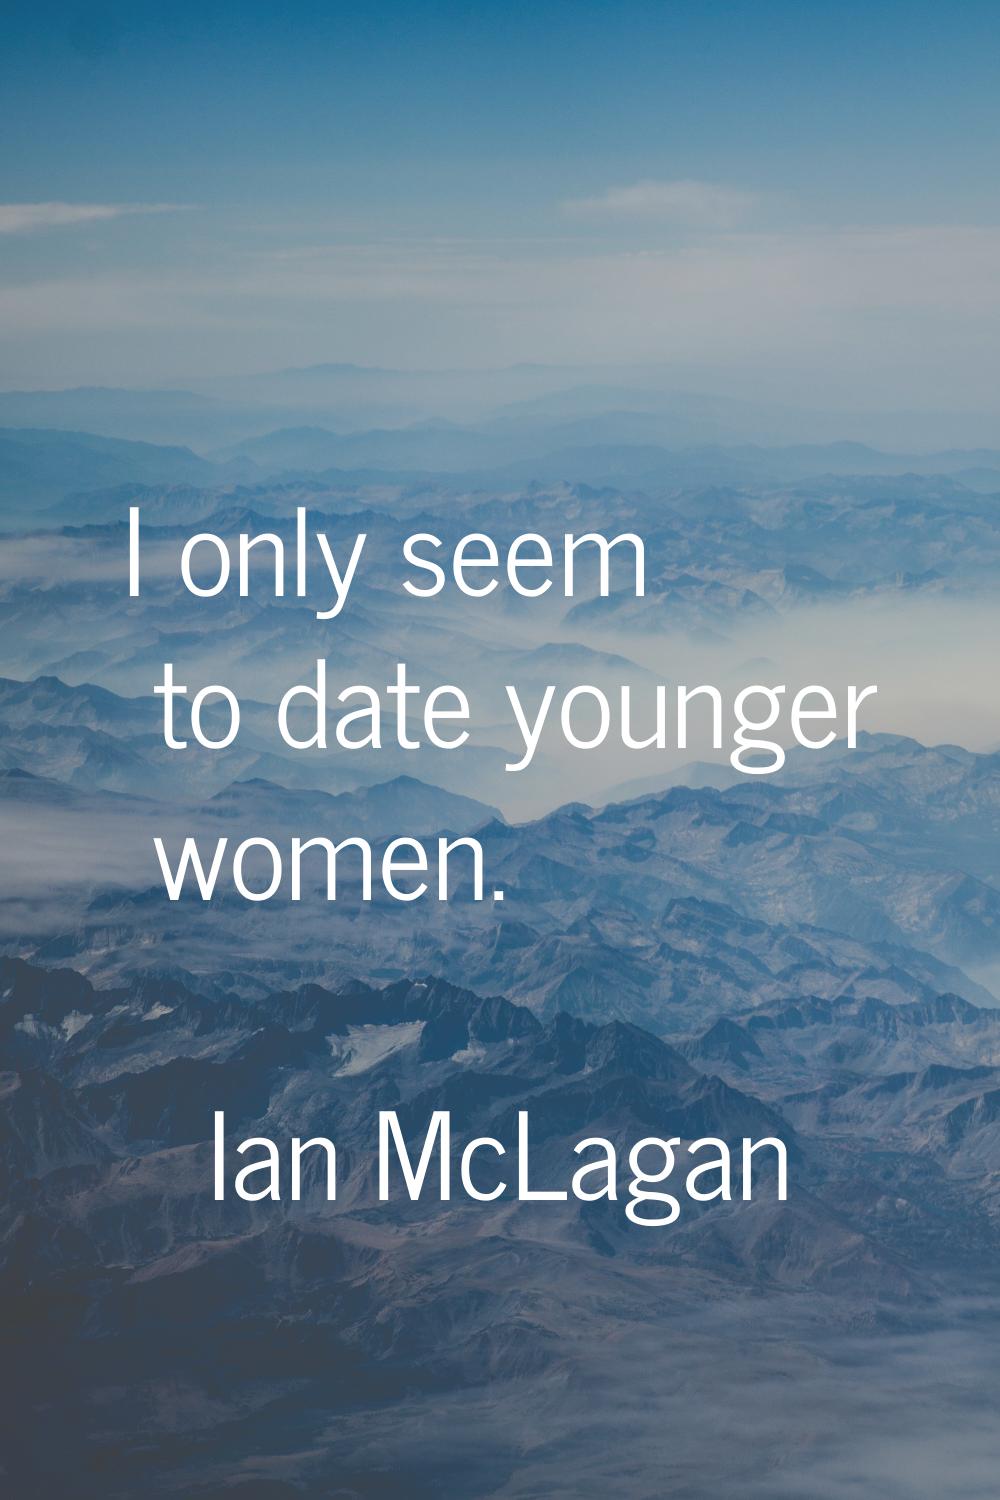 I only seem to date younger women.